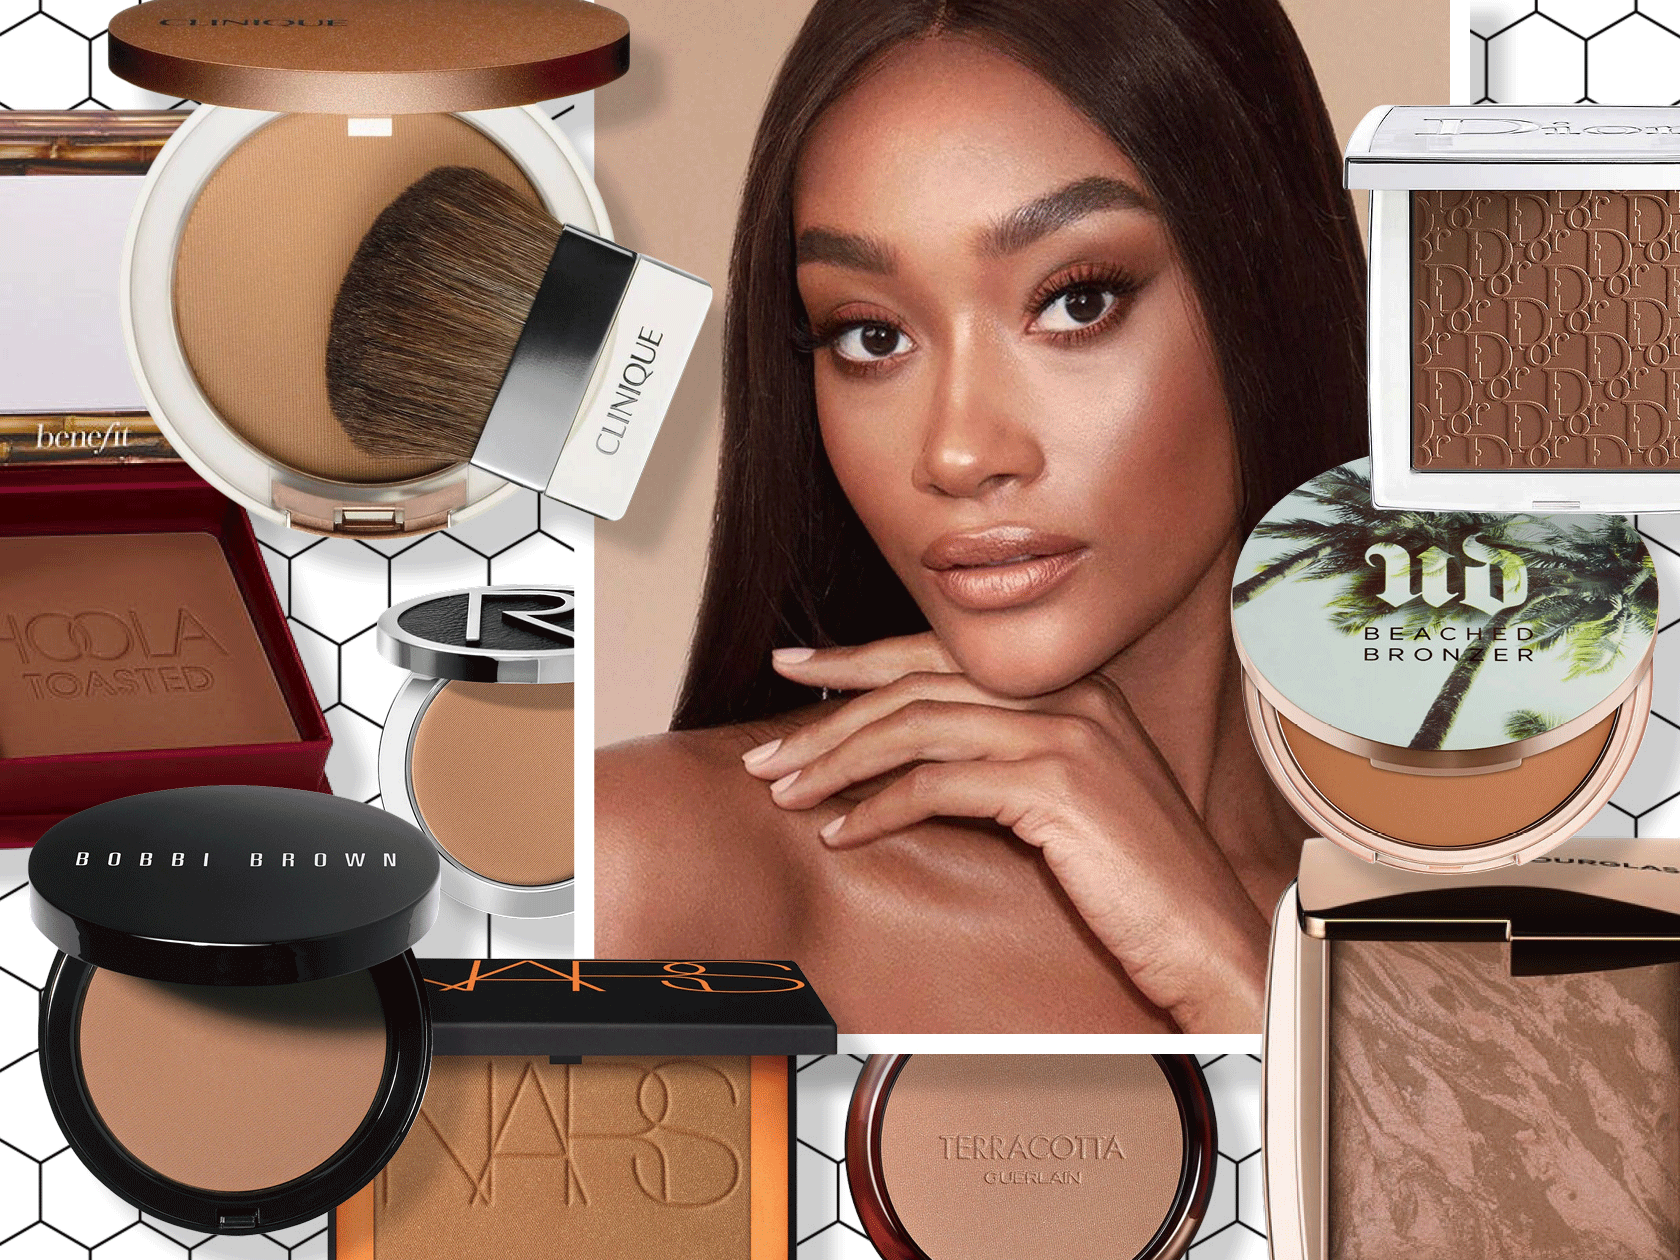 onto that summer holiday glow these Stylist-approved bronzers